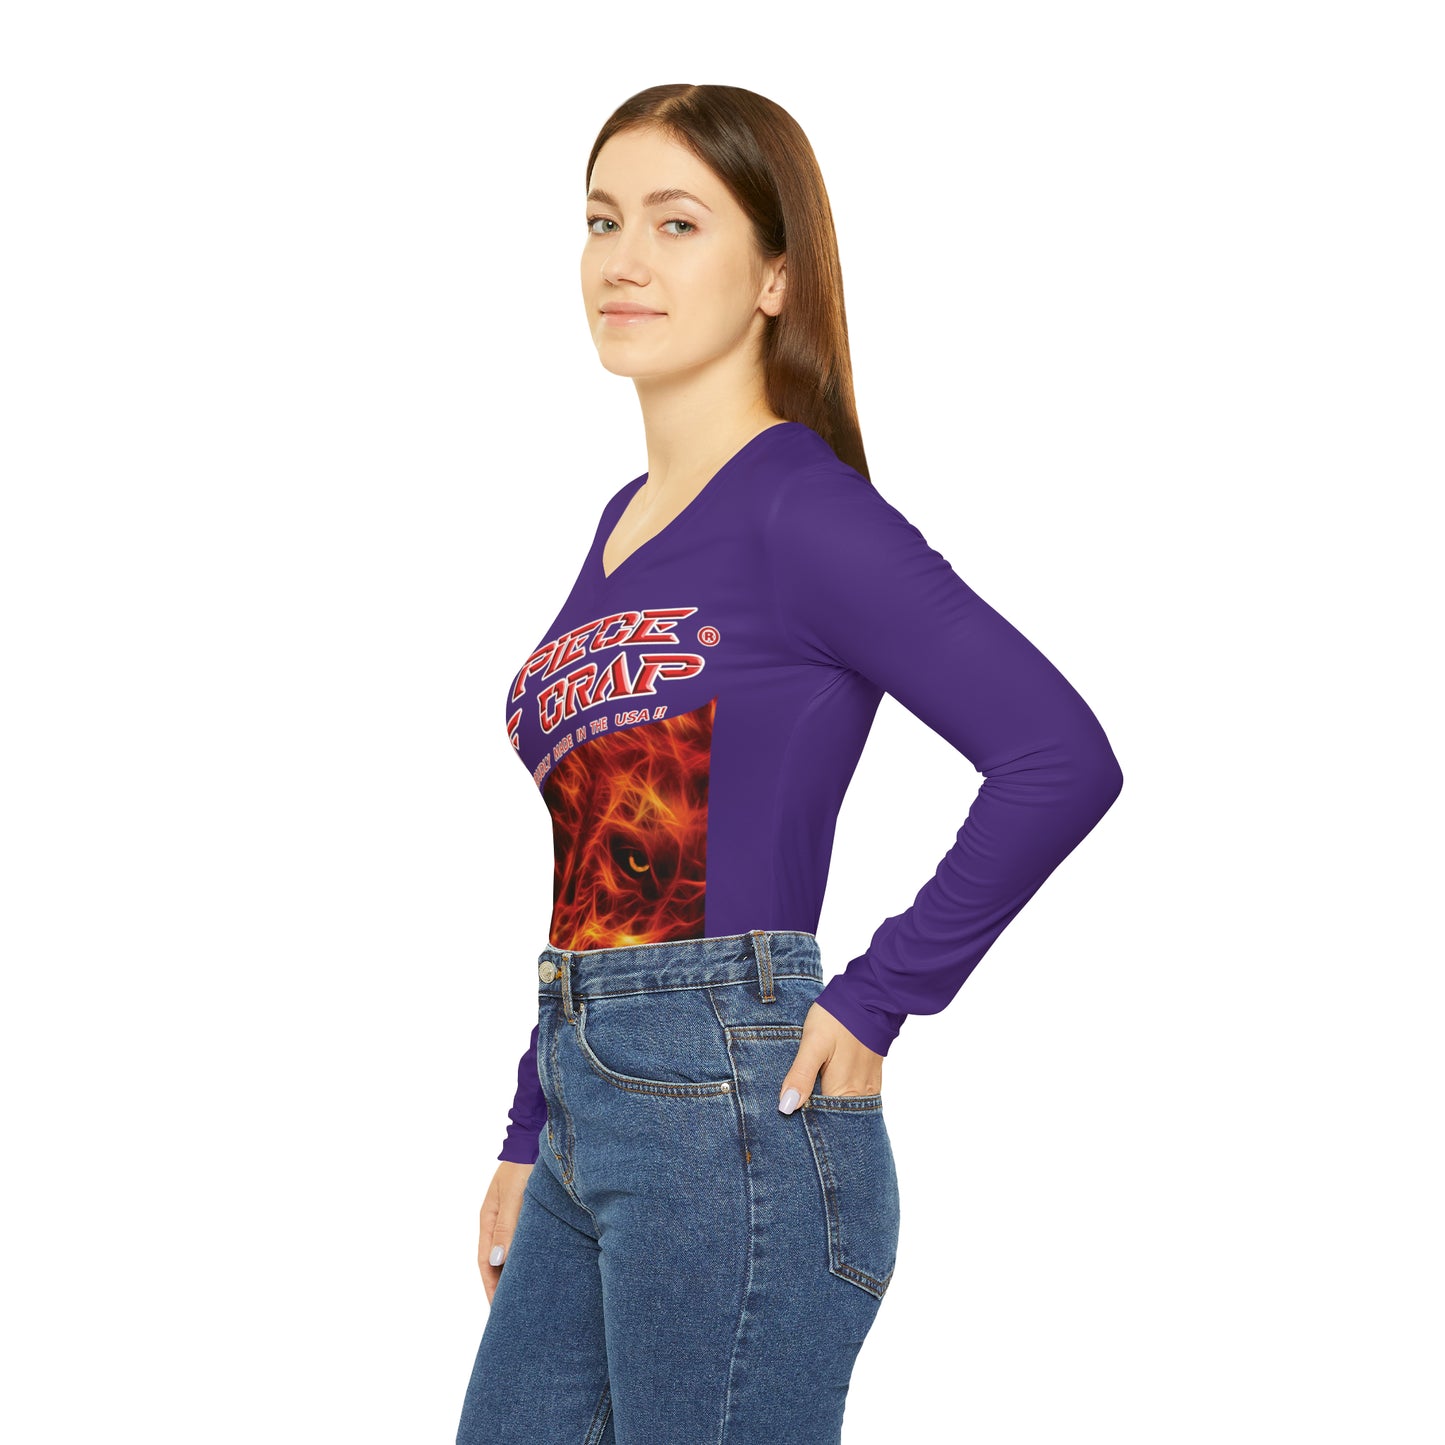 A Piece Of Crap Chic Long Sleeve V-Neck Tee - Purple